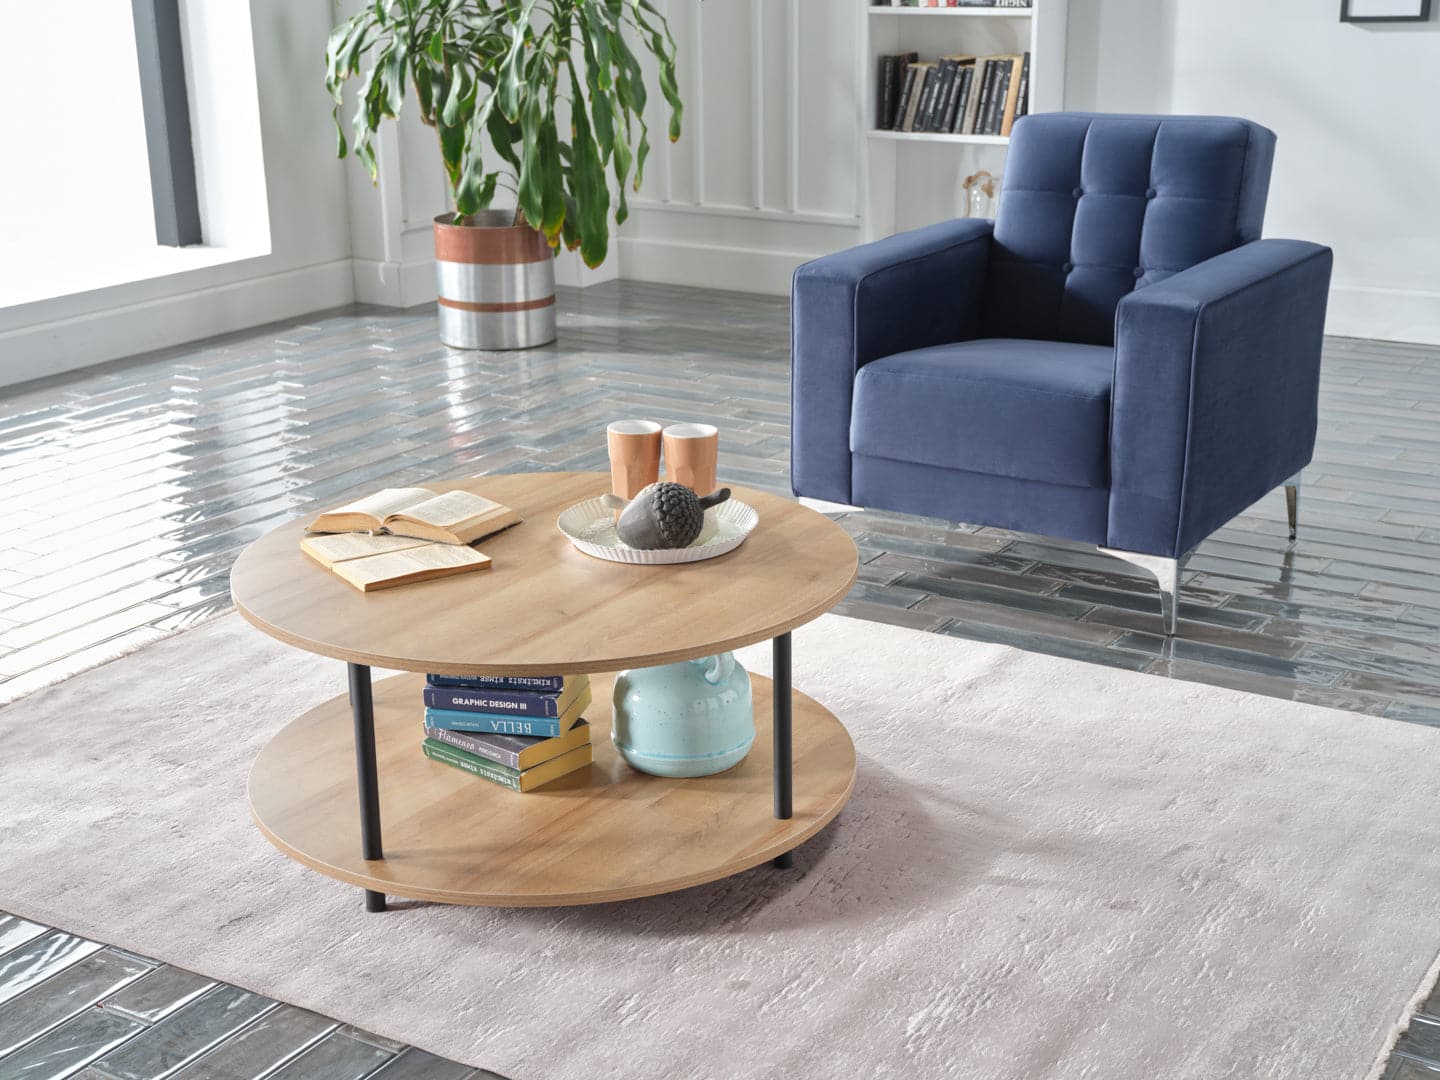 Elton Coffee Table by Bellona